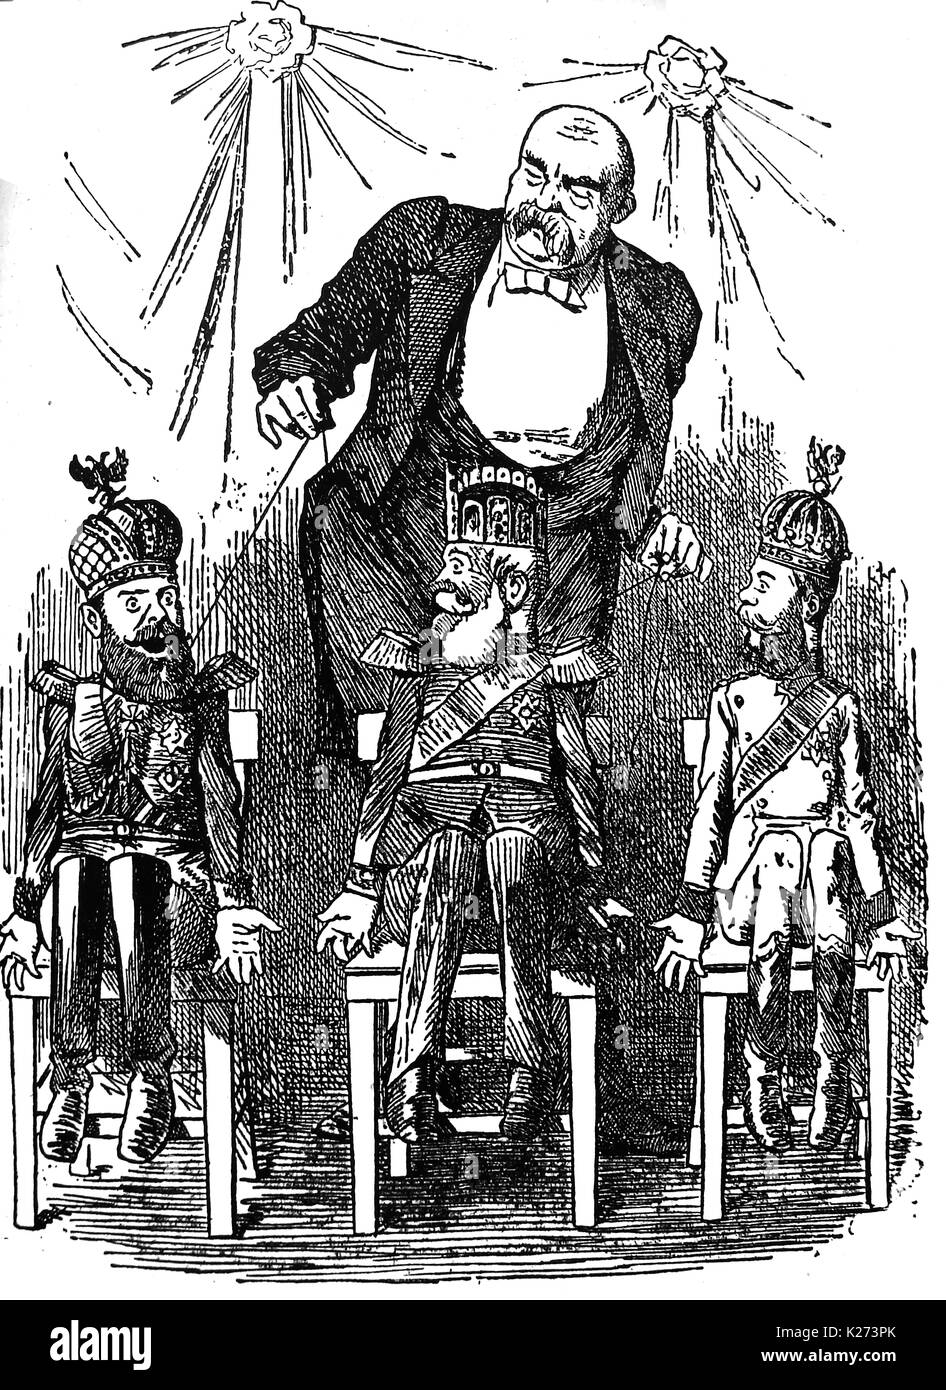 Political cartoon showing Otto von Bismarck acting as a puppet master controlling the emperors of Austria, Germany & Russia Stock Photo